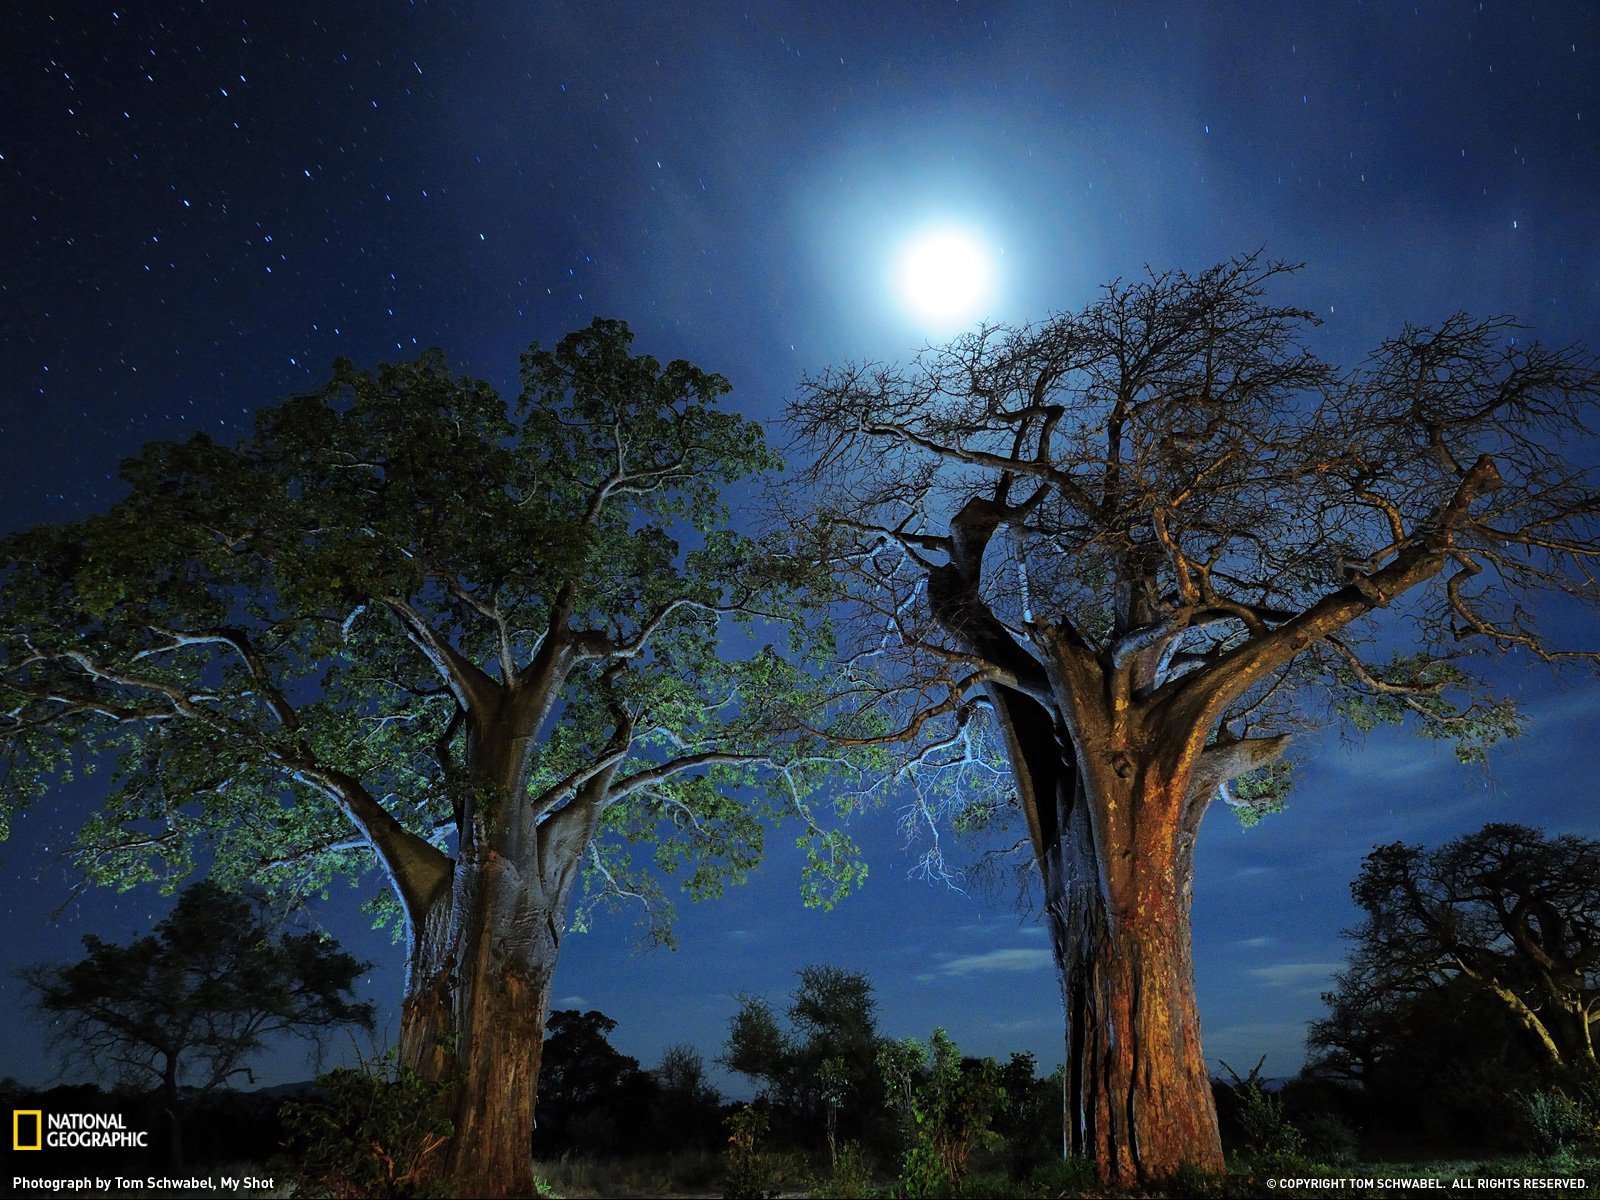  Photo Tanzania Wallpaper National Geographic Photo of the Day